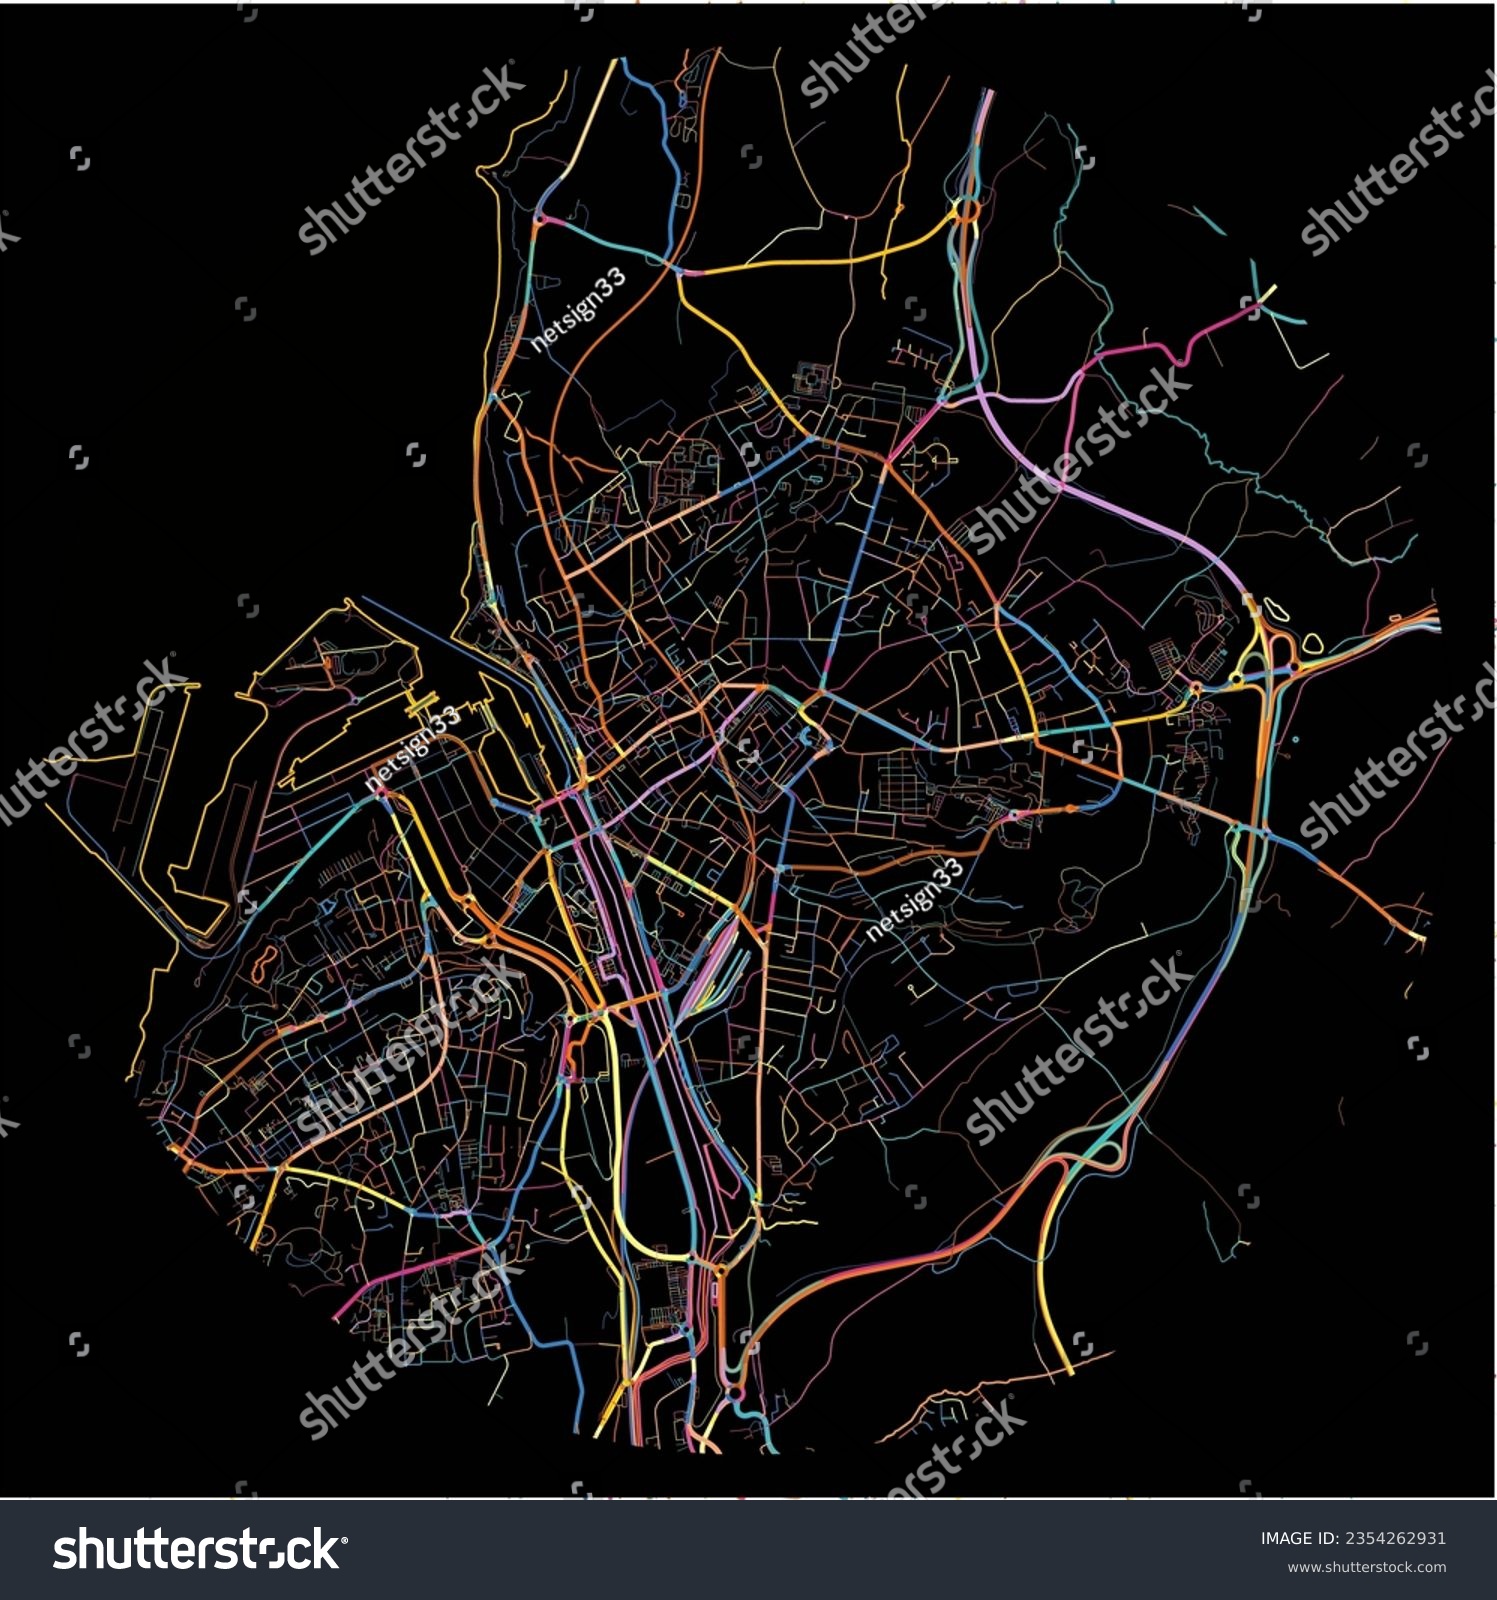 SVG of Map of Boulogne-sur-Mer, Pas-de-Calais with all major and minor roads, railways and waterways. Colorful line art on black background. svg